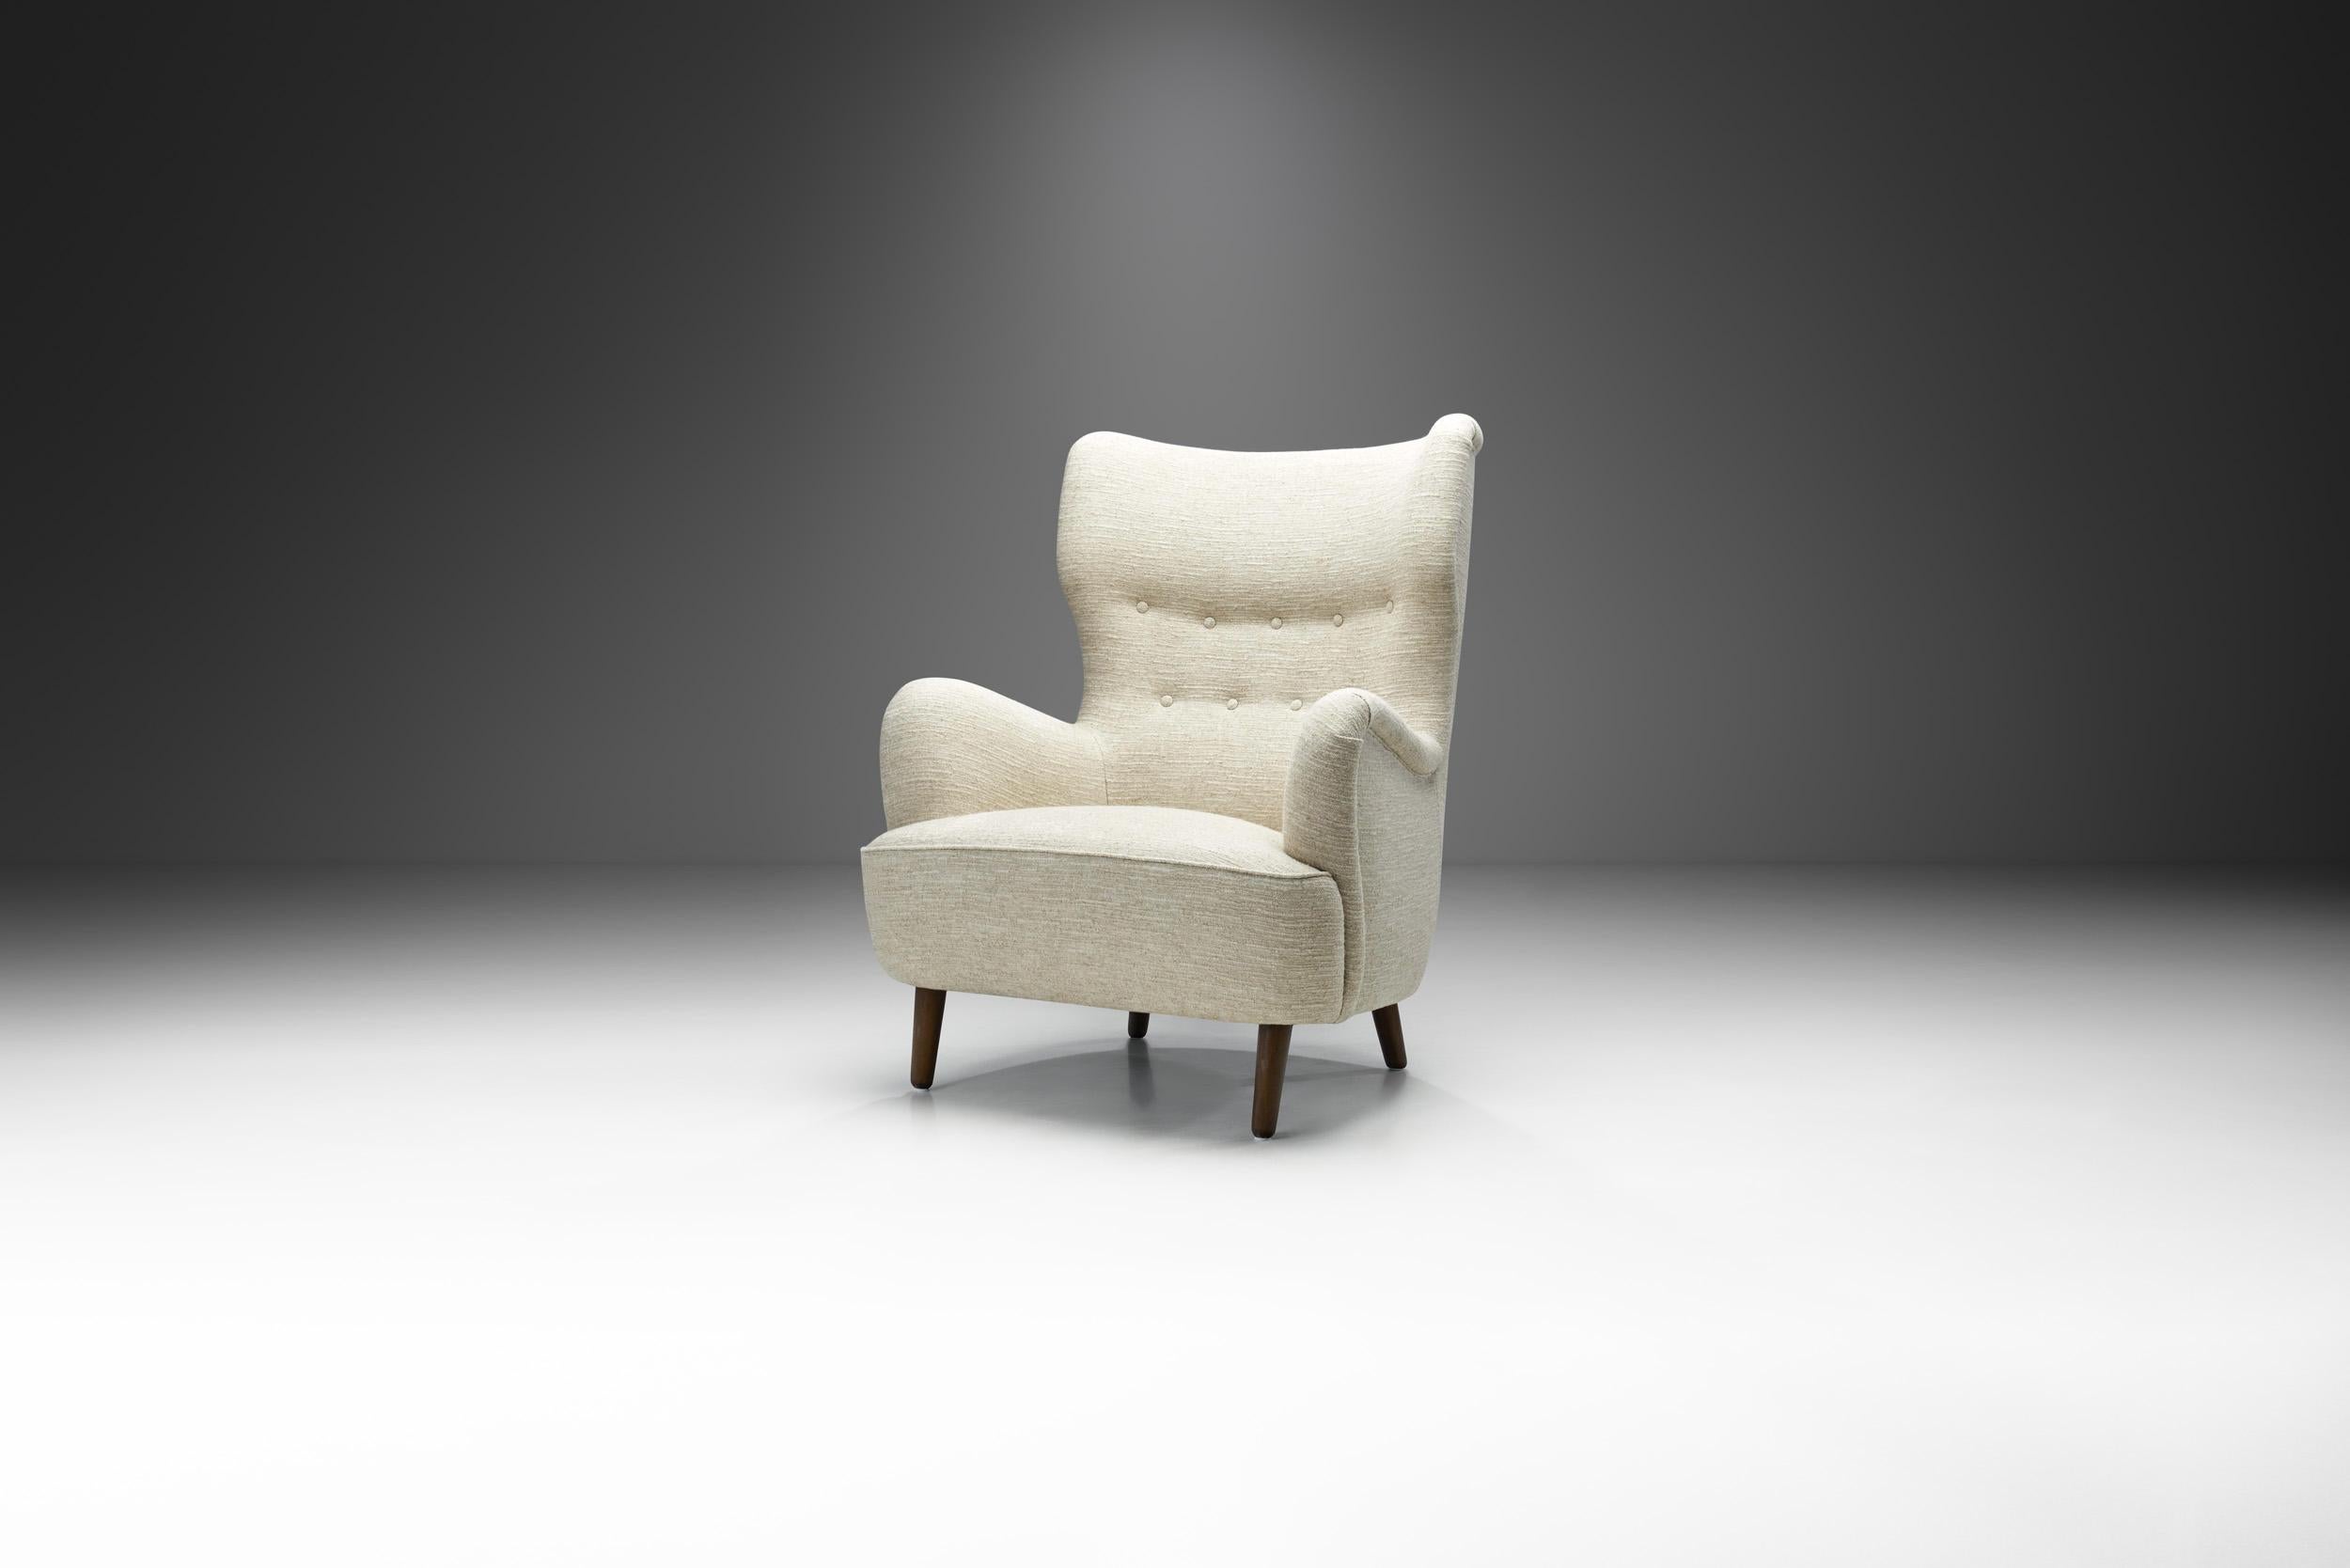 Danish mid-century design is known for clean and pure lines that coupled craftsmanship with delicate research into proportions, materials and the requirements of the human body, adapting design to modern-day needs. This wingback chair is a prime and